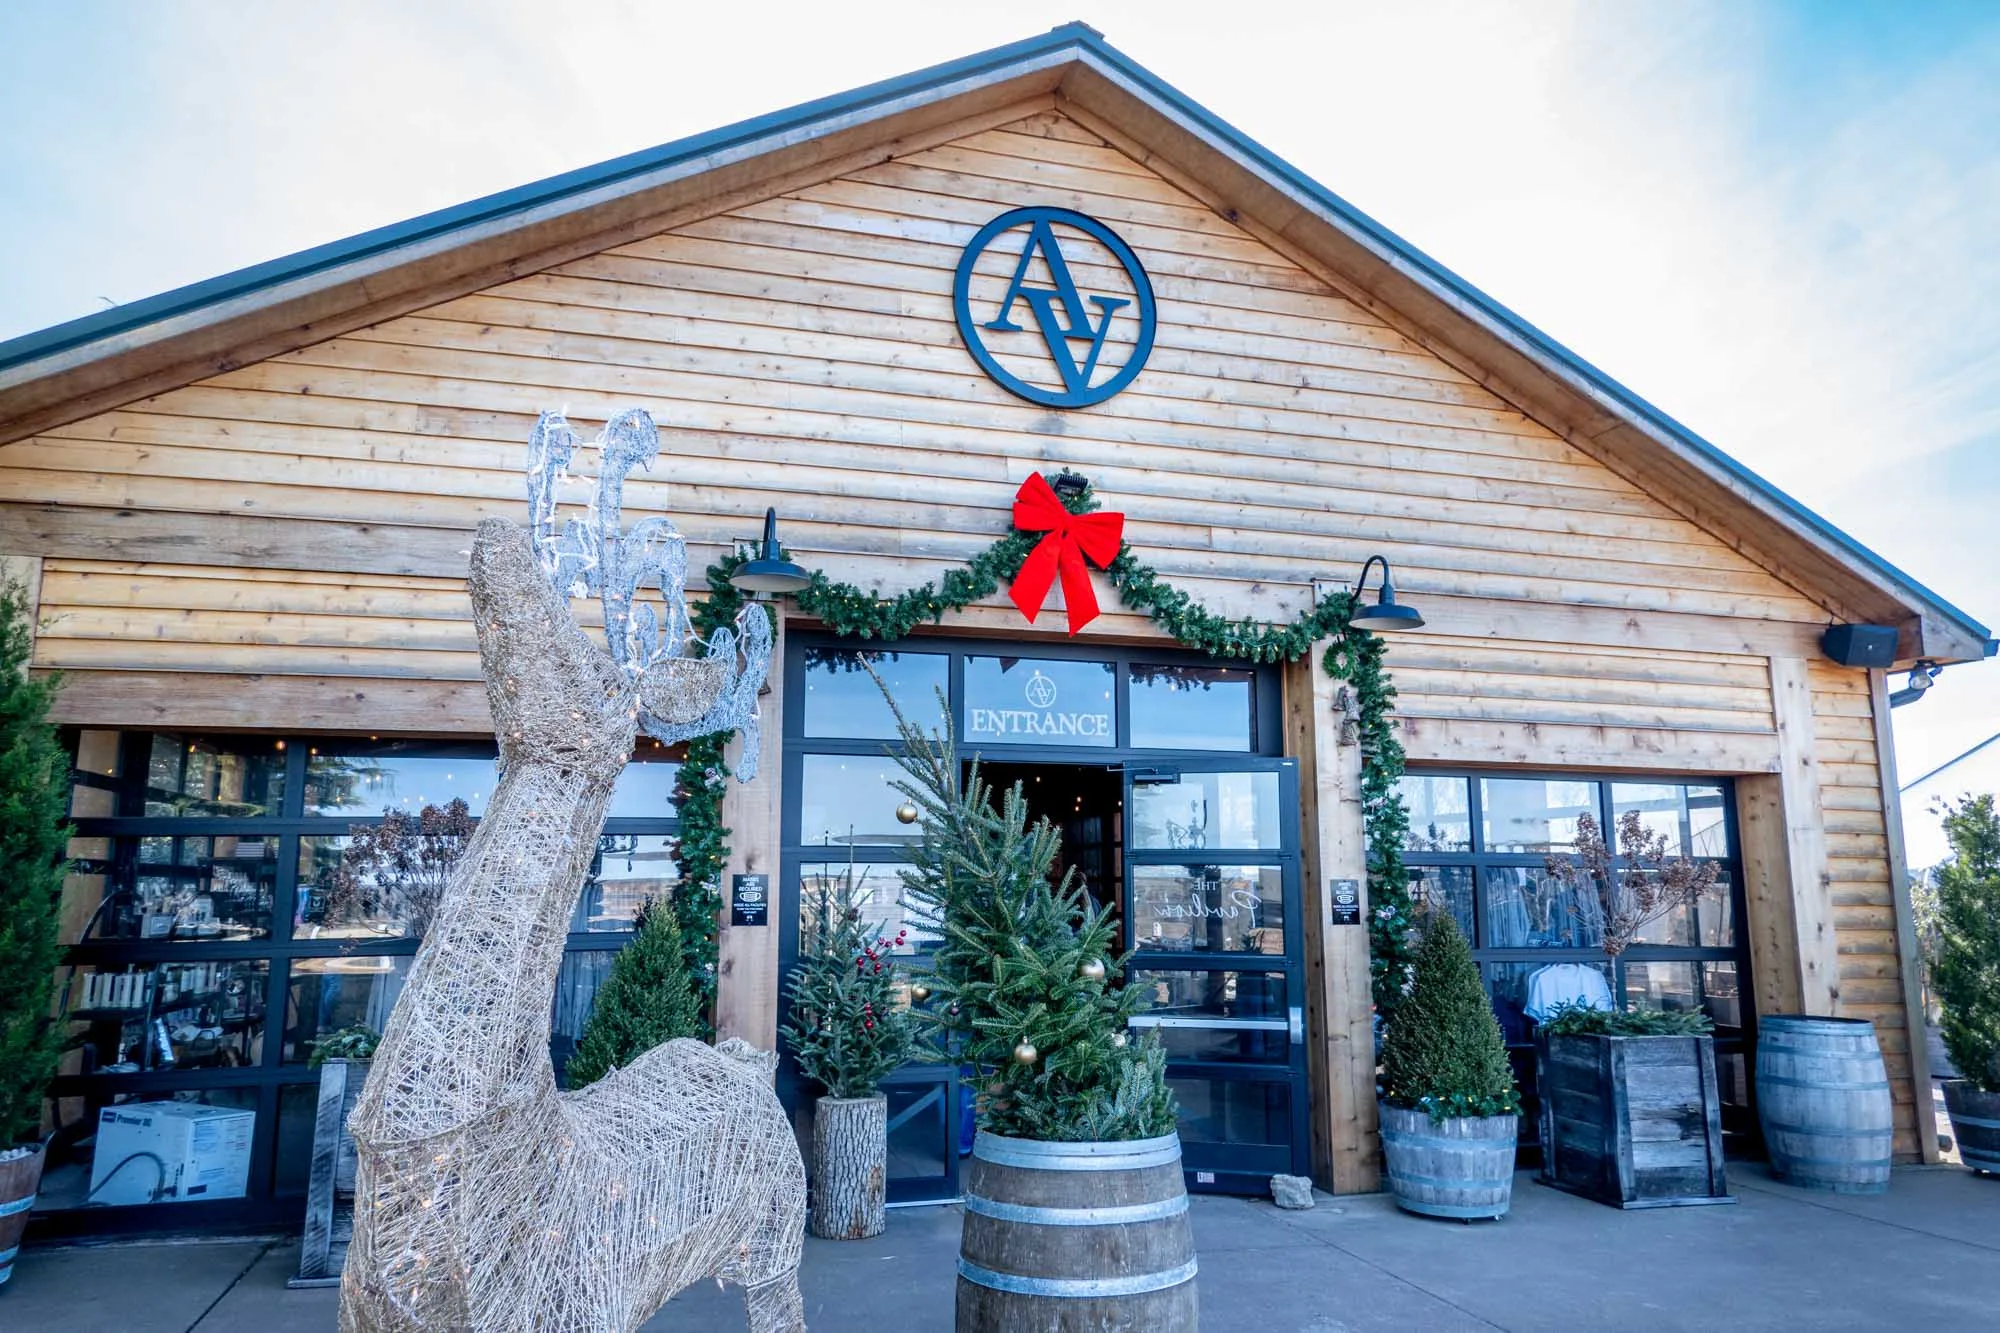 Reindeer decorations and holiday garland outside a winery tasting room